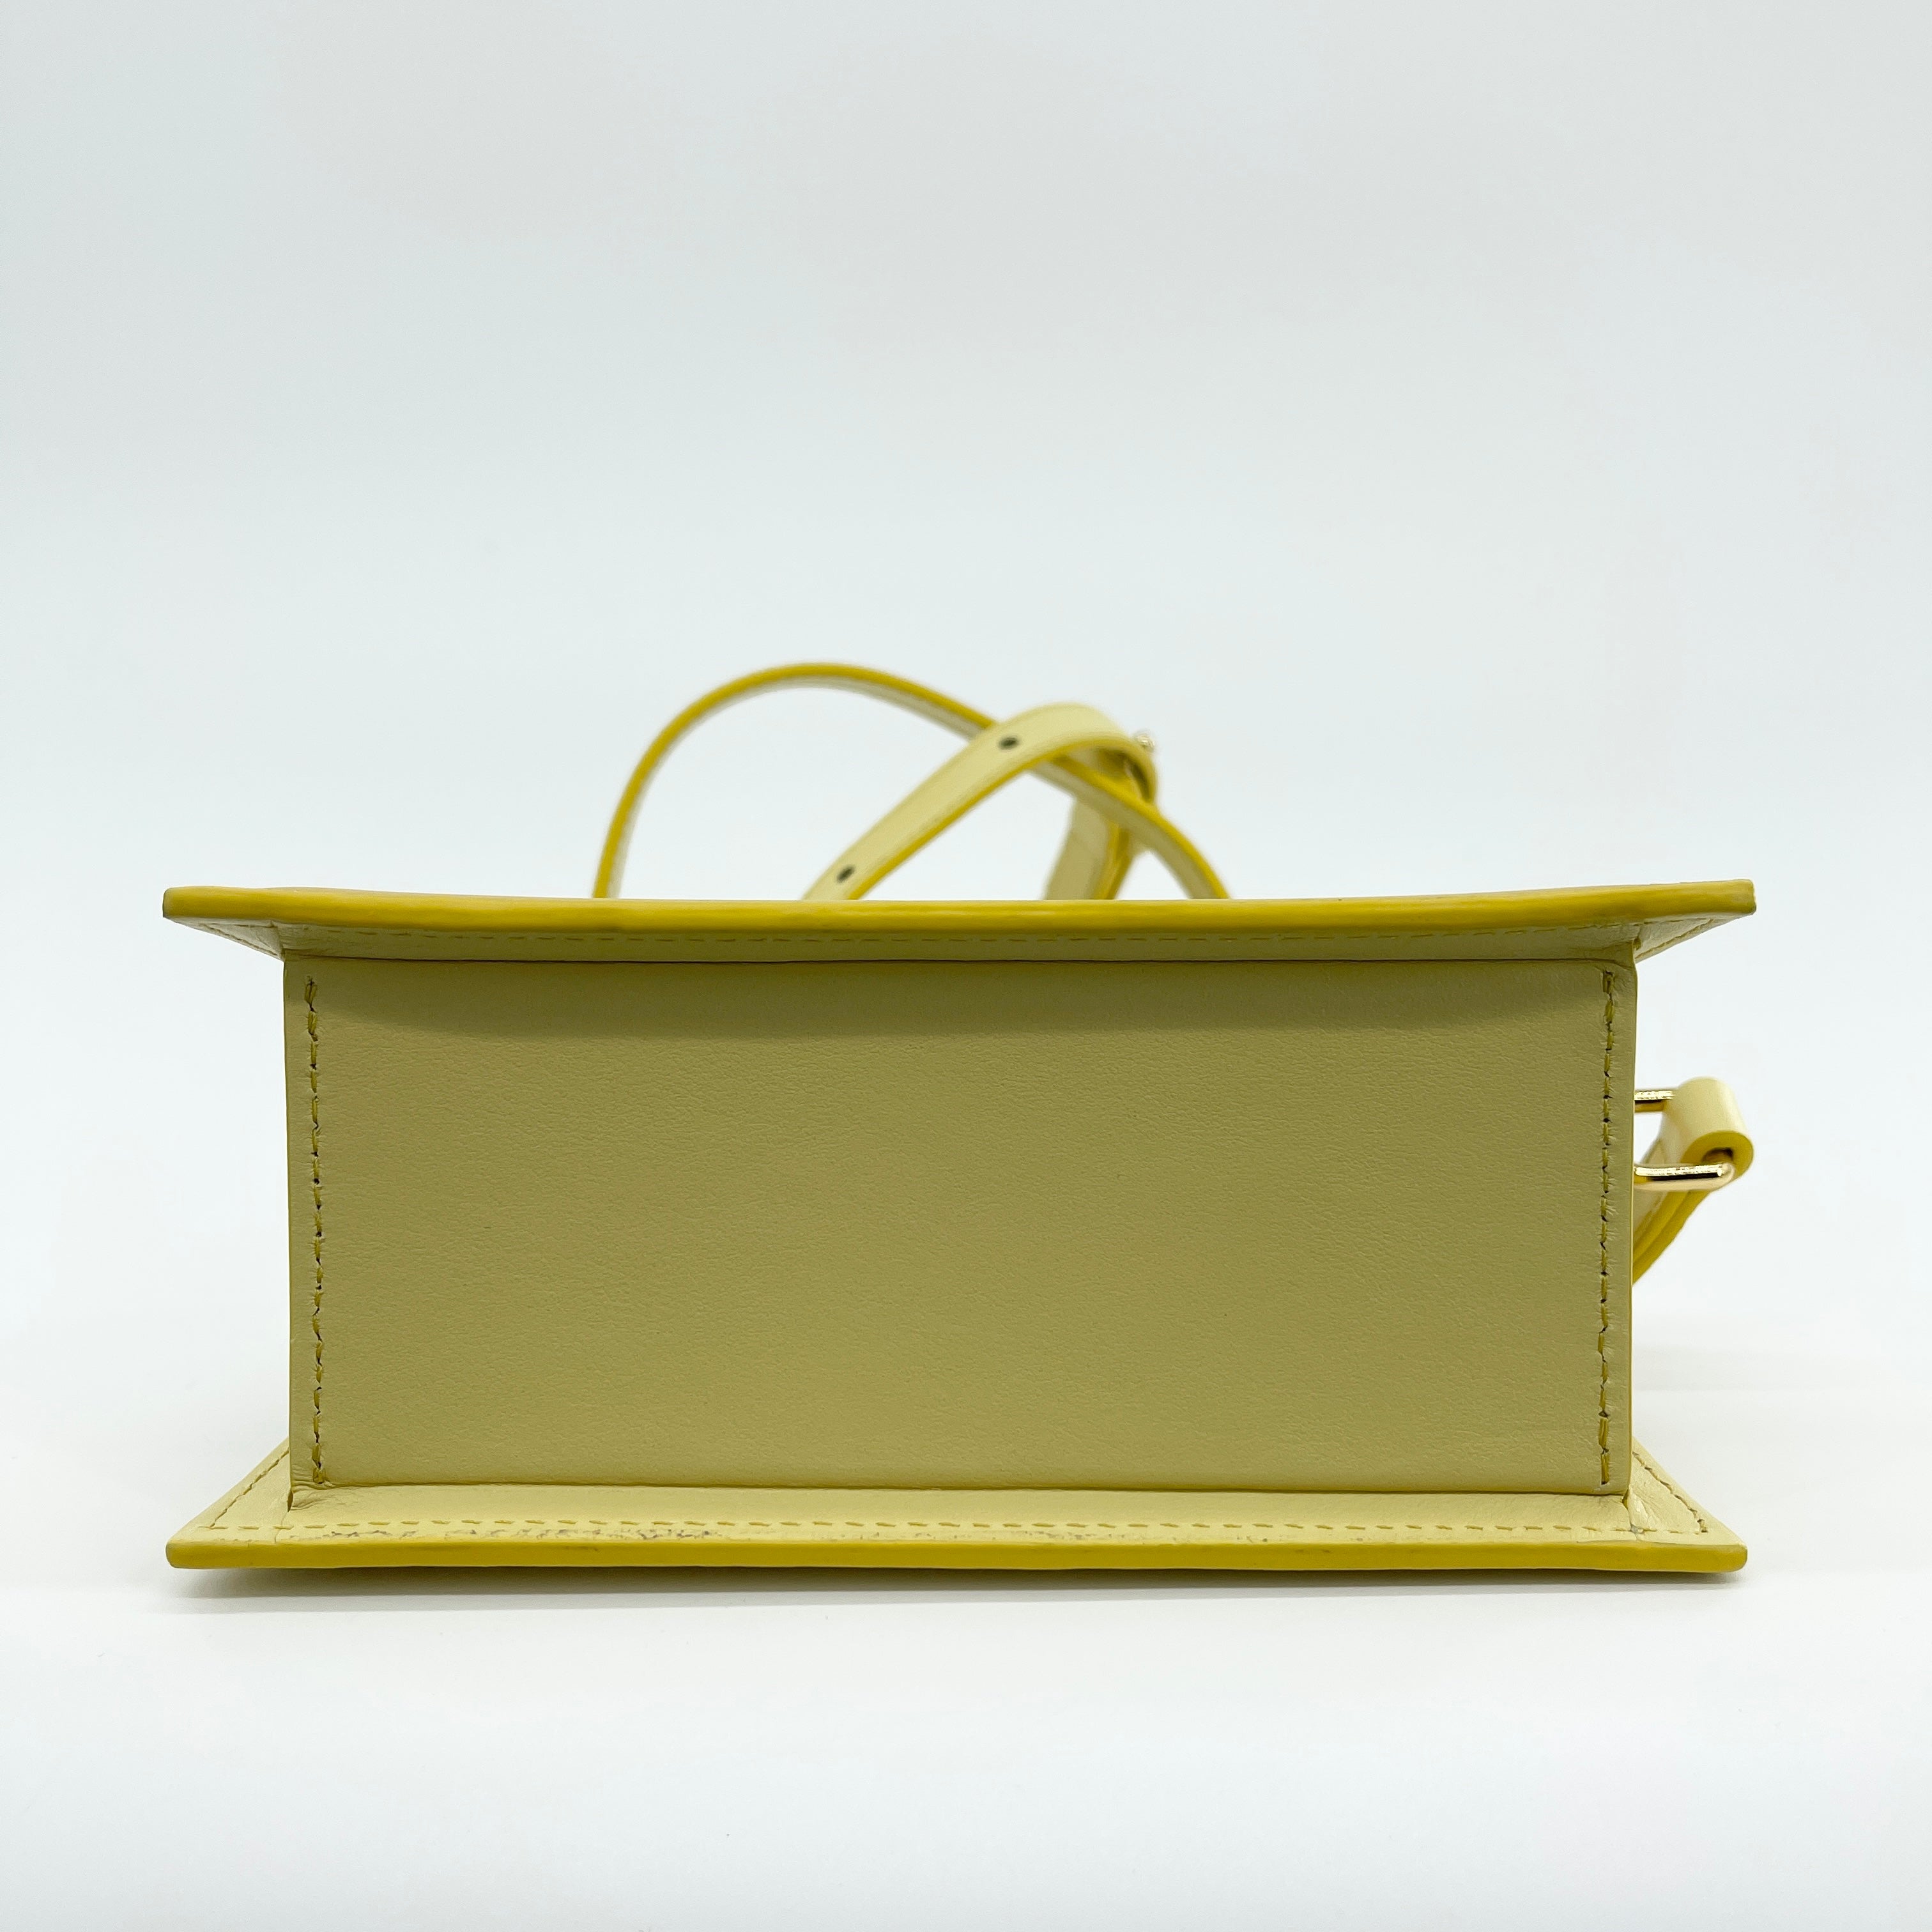 Le Chiquito Noeud Bag Gradient Yellow